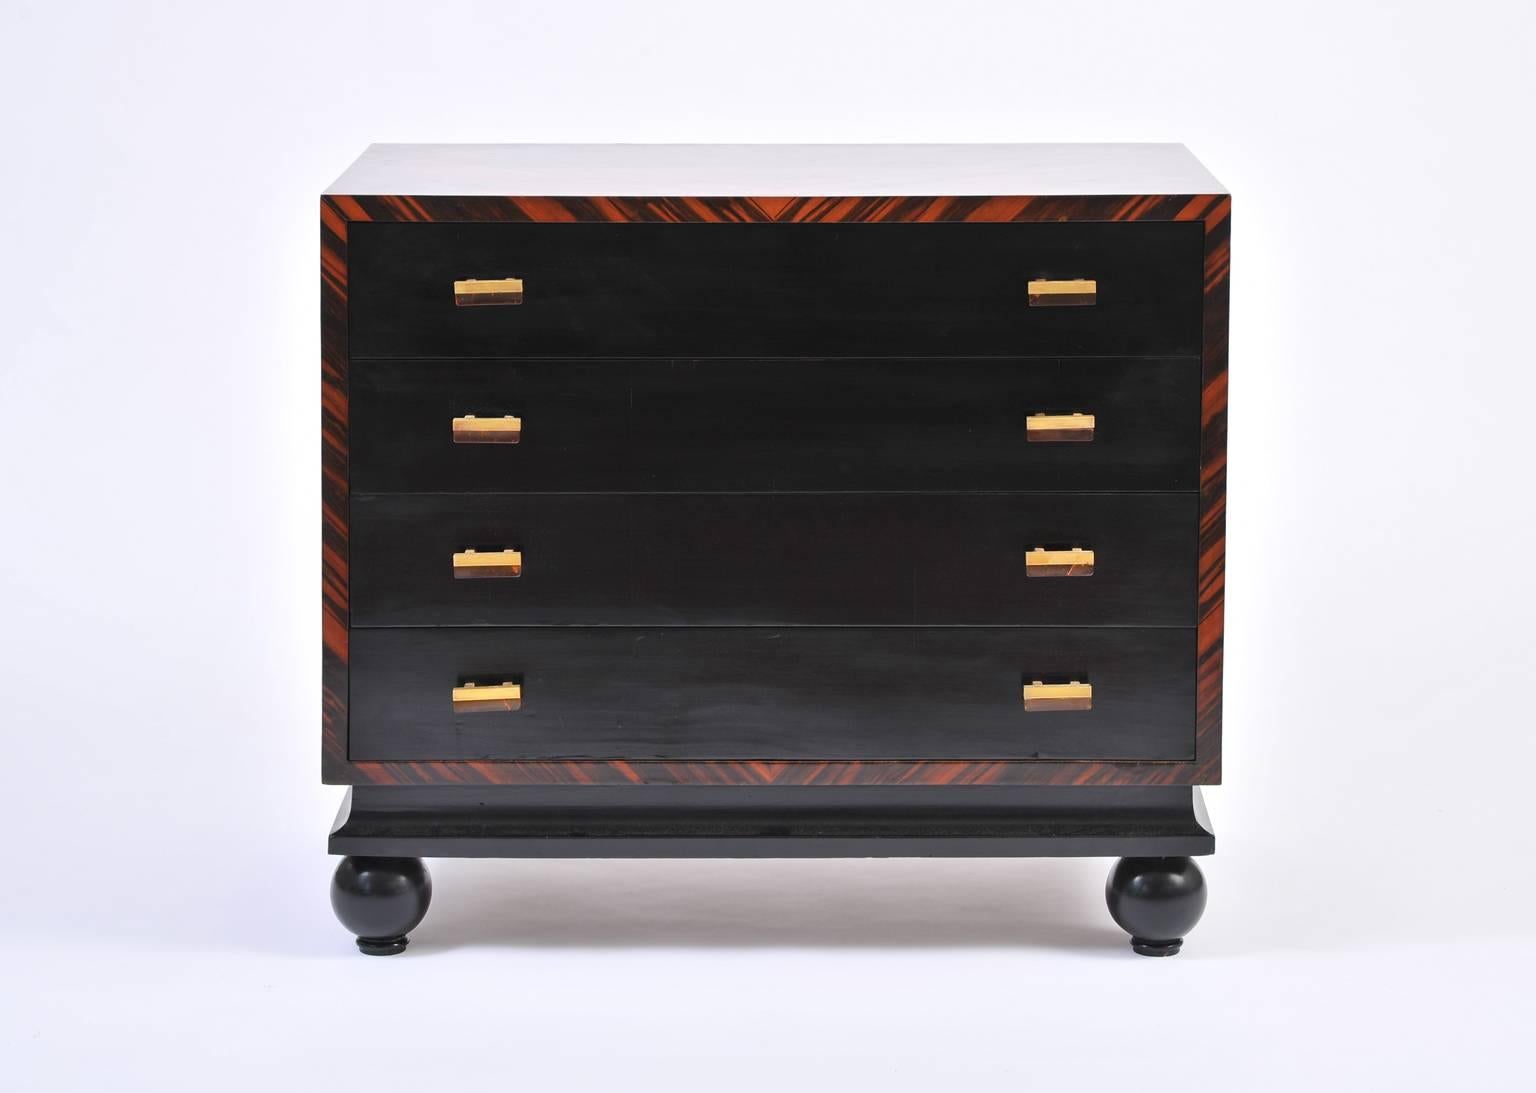 An Art Deco Macassar ebony and black lacquer four-drawer commode, each drawer adorned with brass and faux tortoiseshell bakelite handles, internally lacquered in coral, on solid ball feet,
Italy, circa 1935.